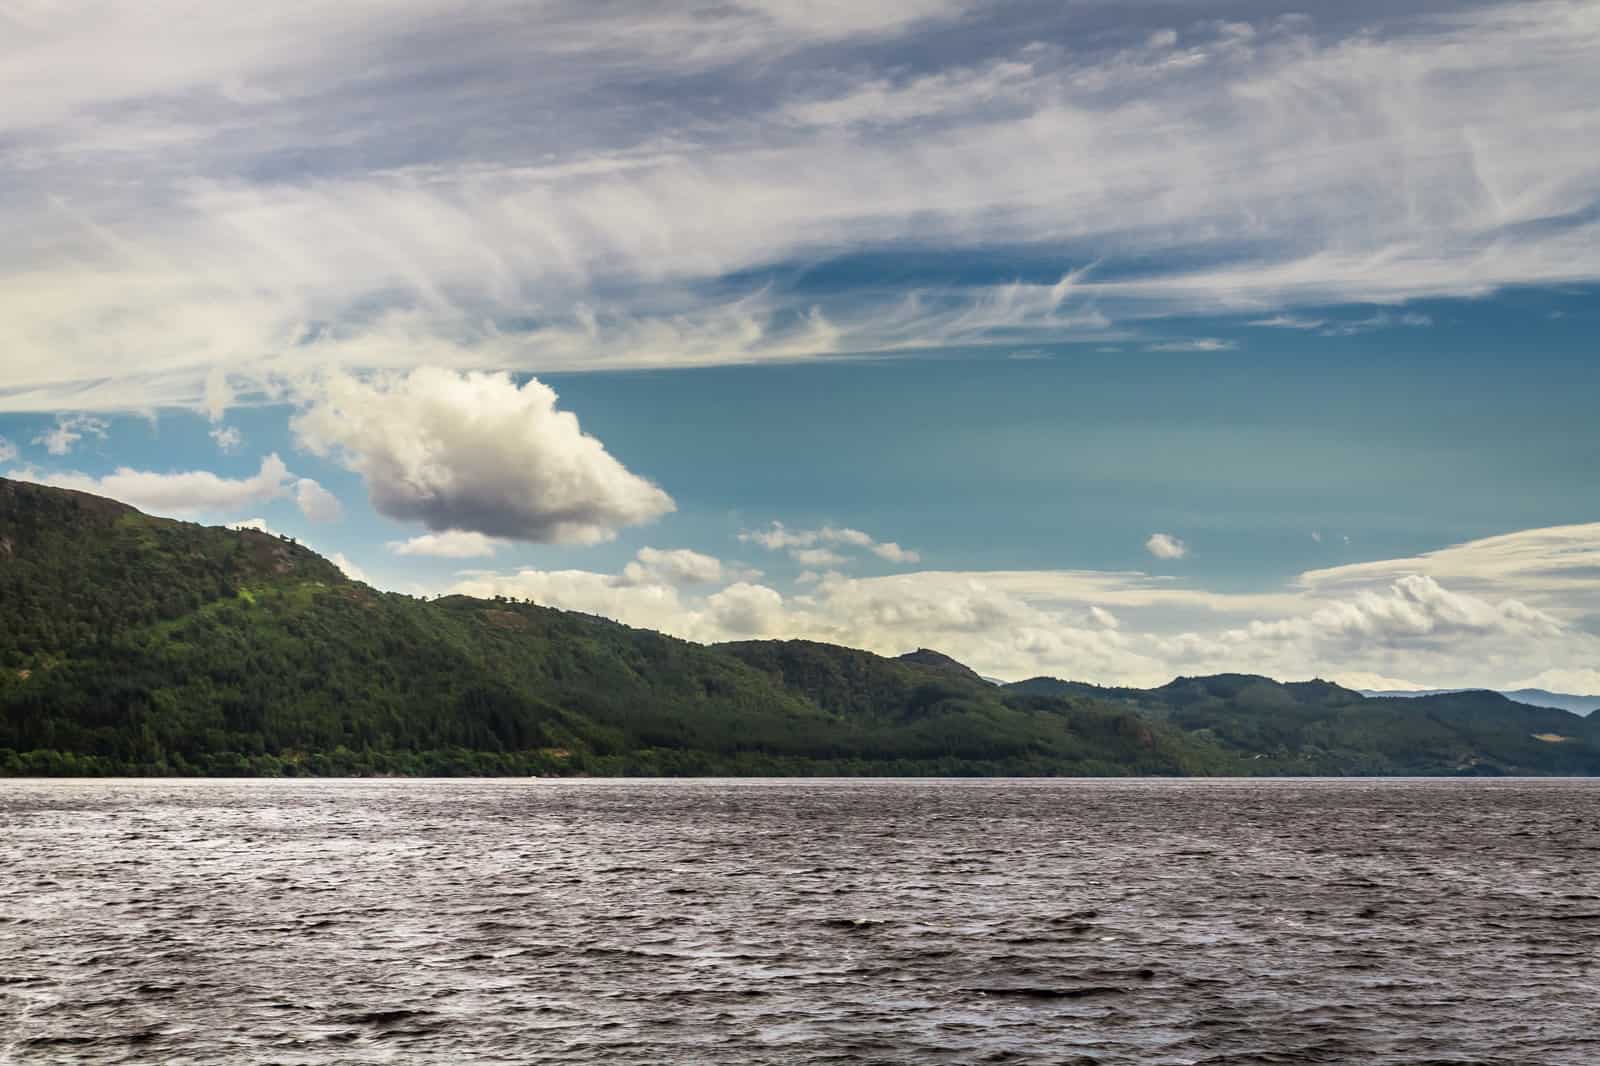 View of the Loch Ness in Scotland in the summer